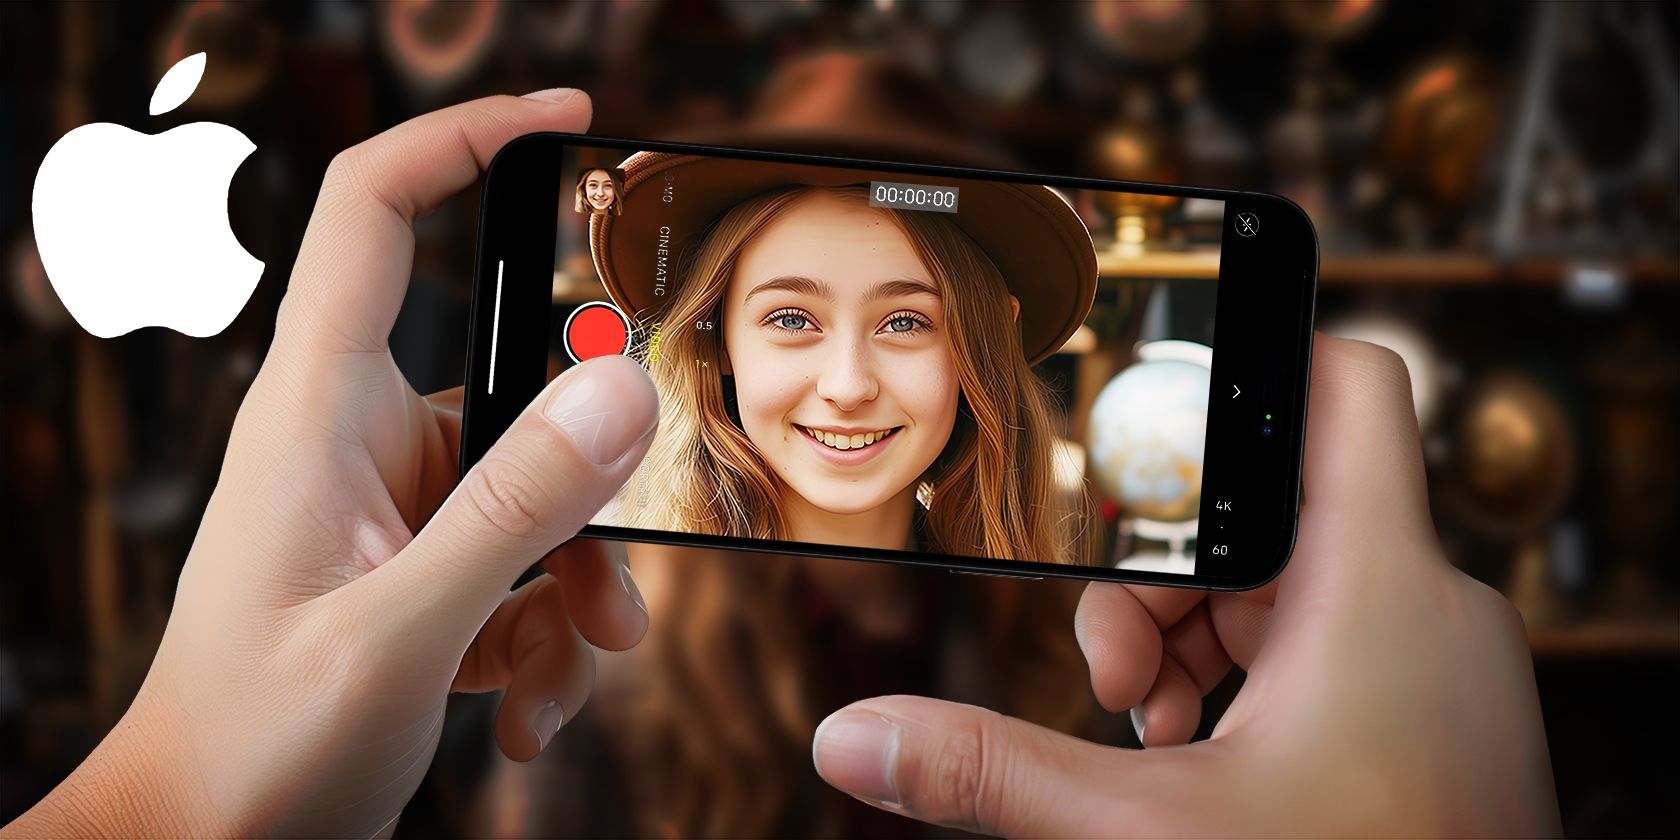 Hands holding a phone, taking a photo of a smiling girl with the camera interface visible